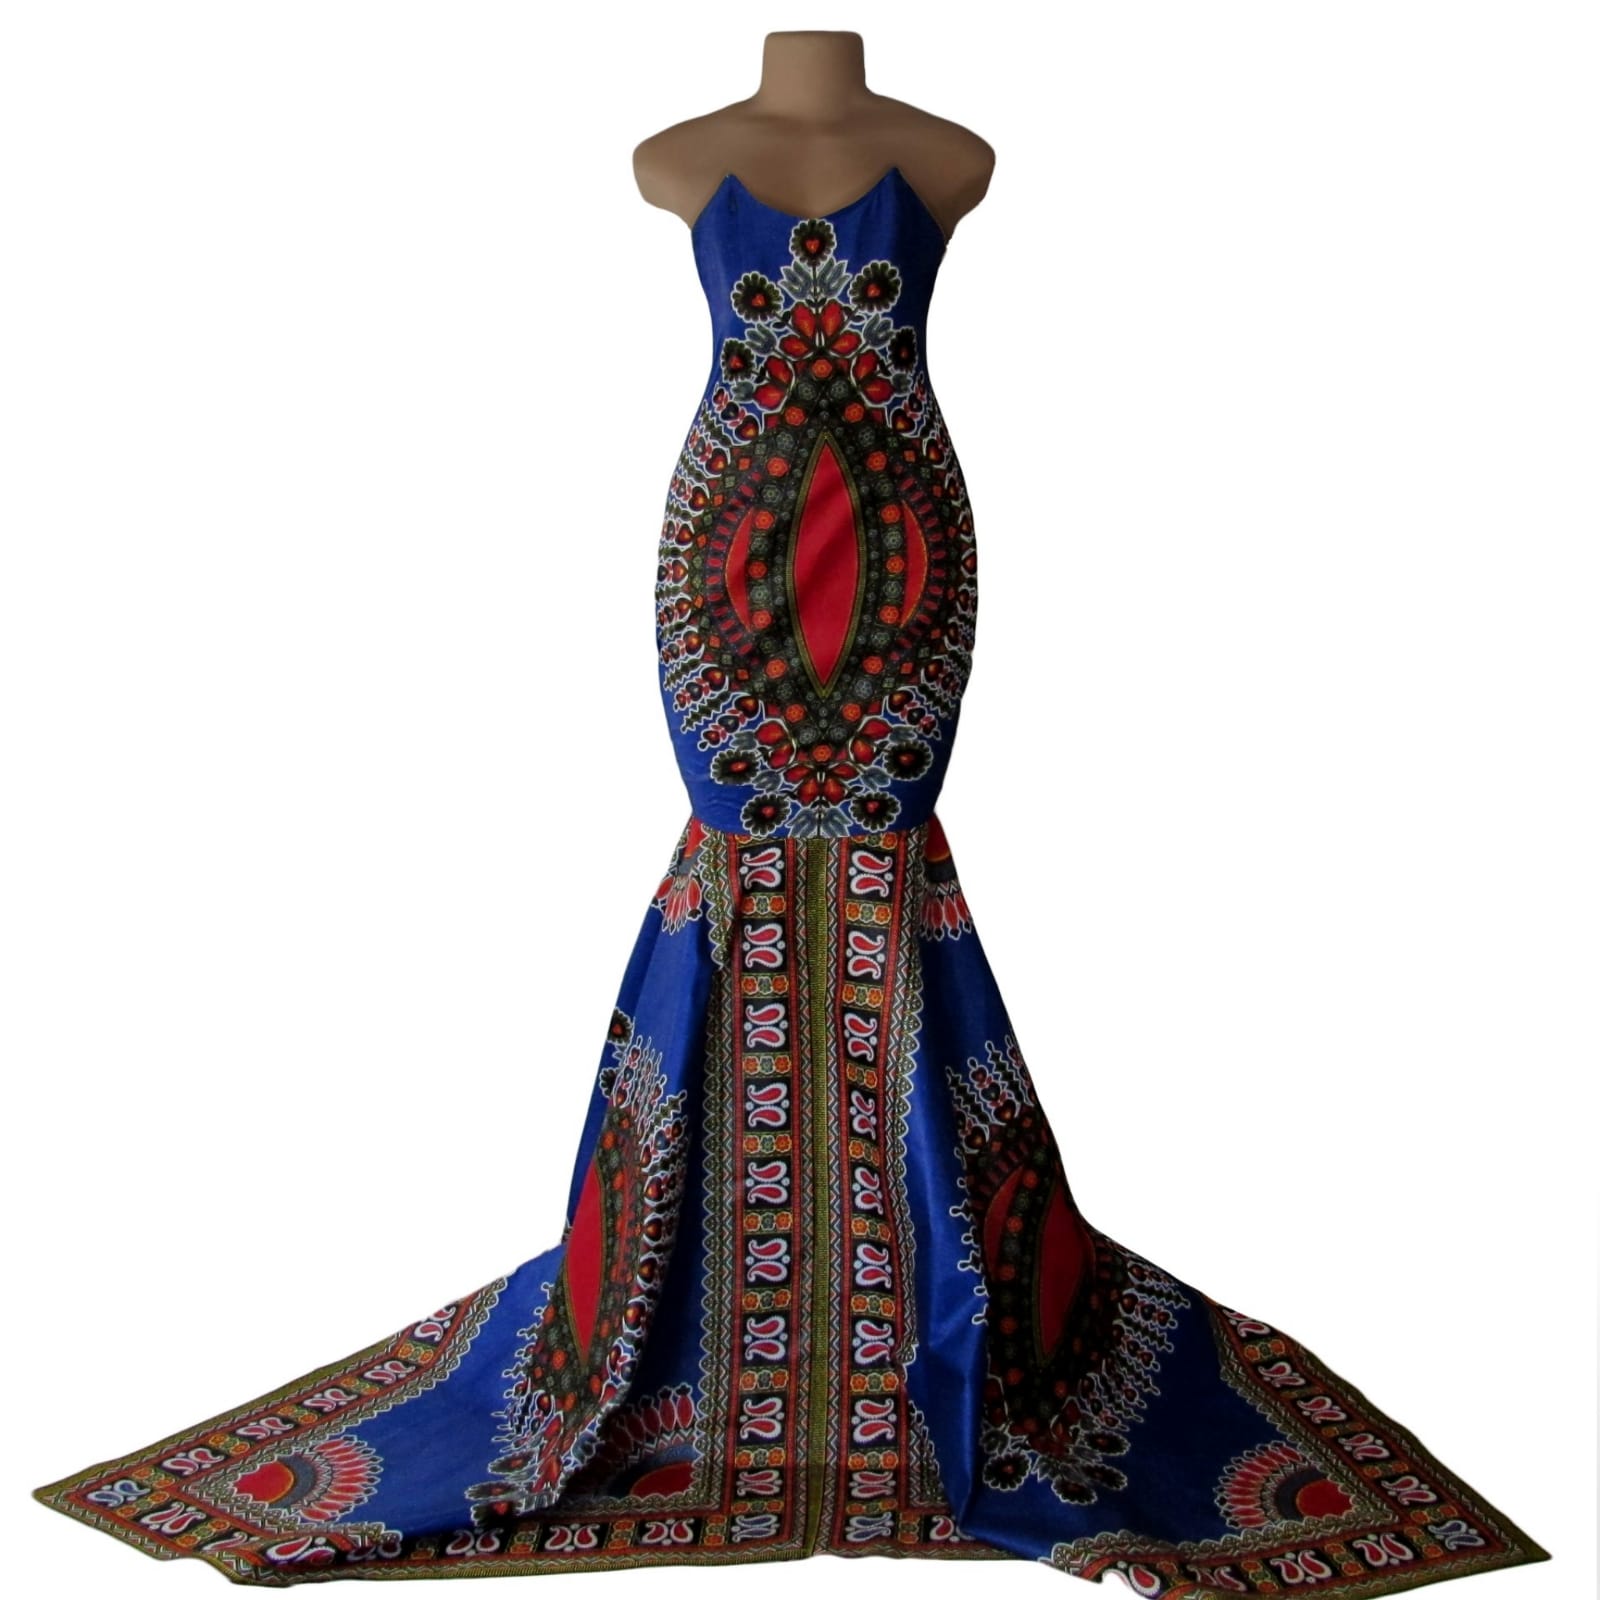 Soft mermaid formal printed dress 5 soft mermaid formal printed dress was worn for a special occasion. This mermaid dress is made with a traditional dashiki print, with a 3 point train.